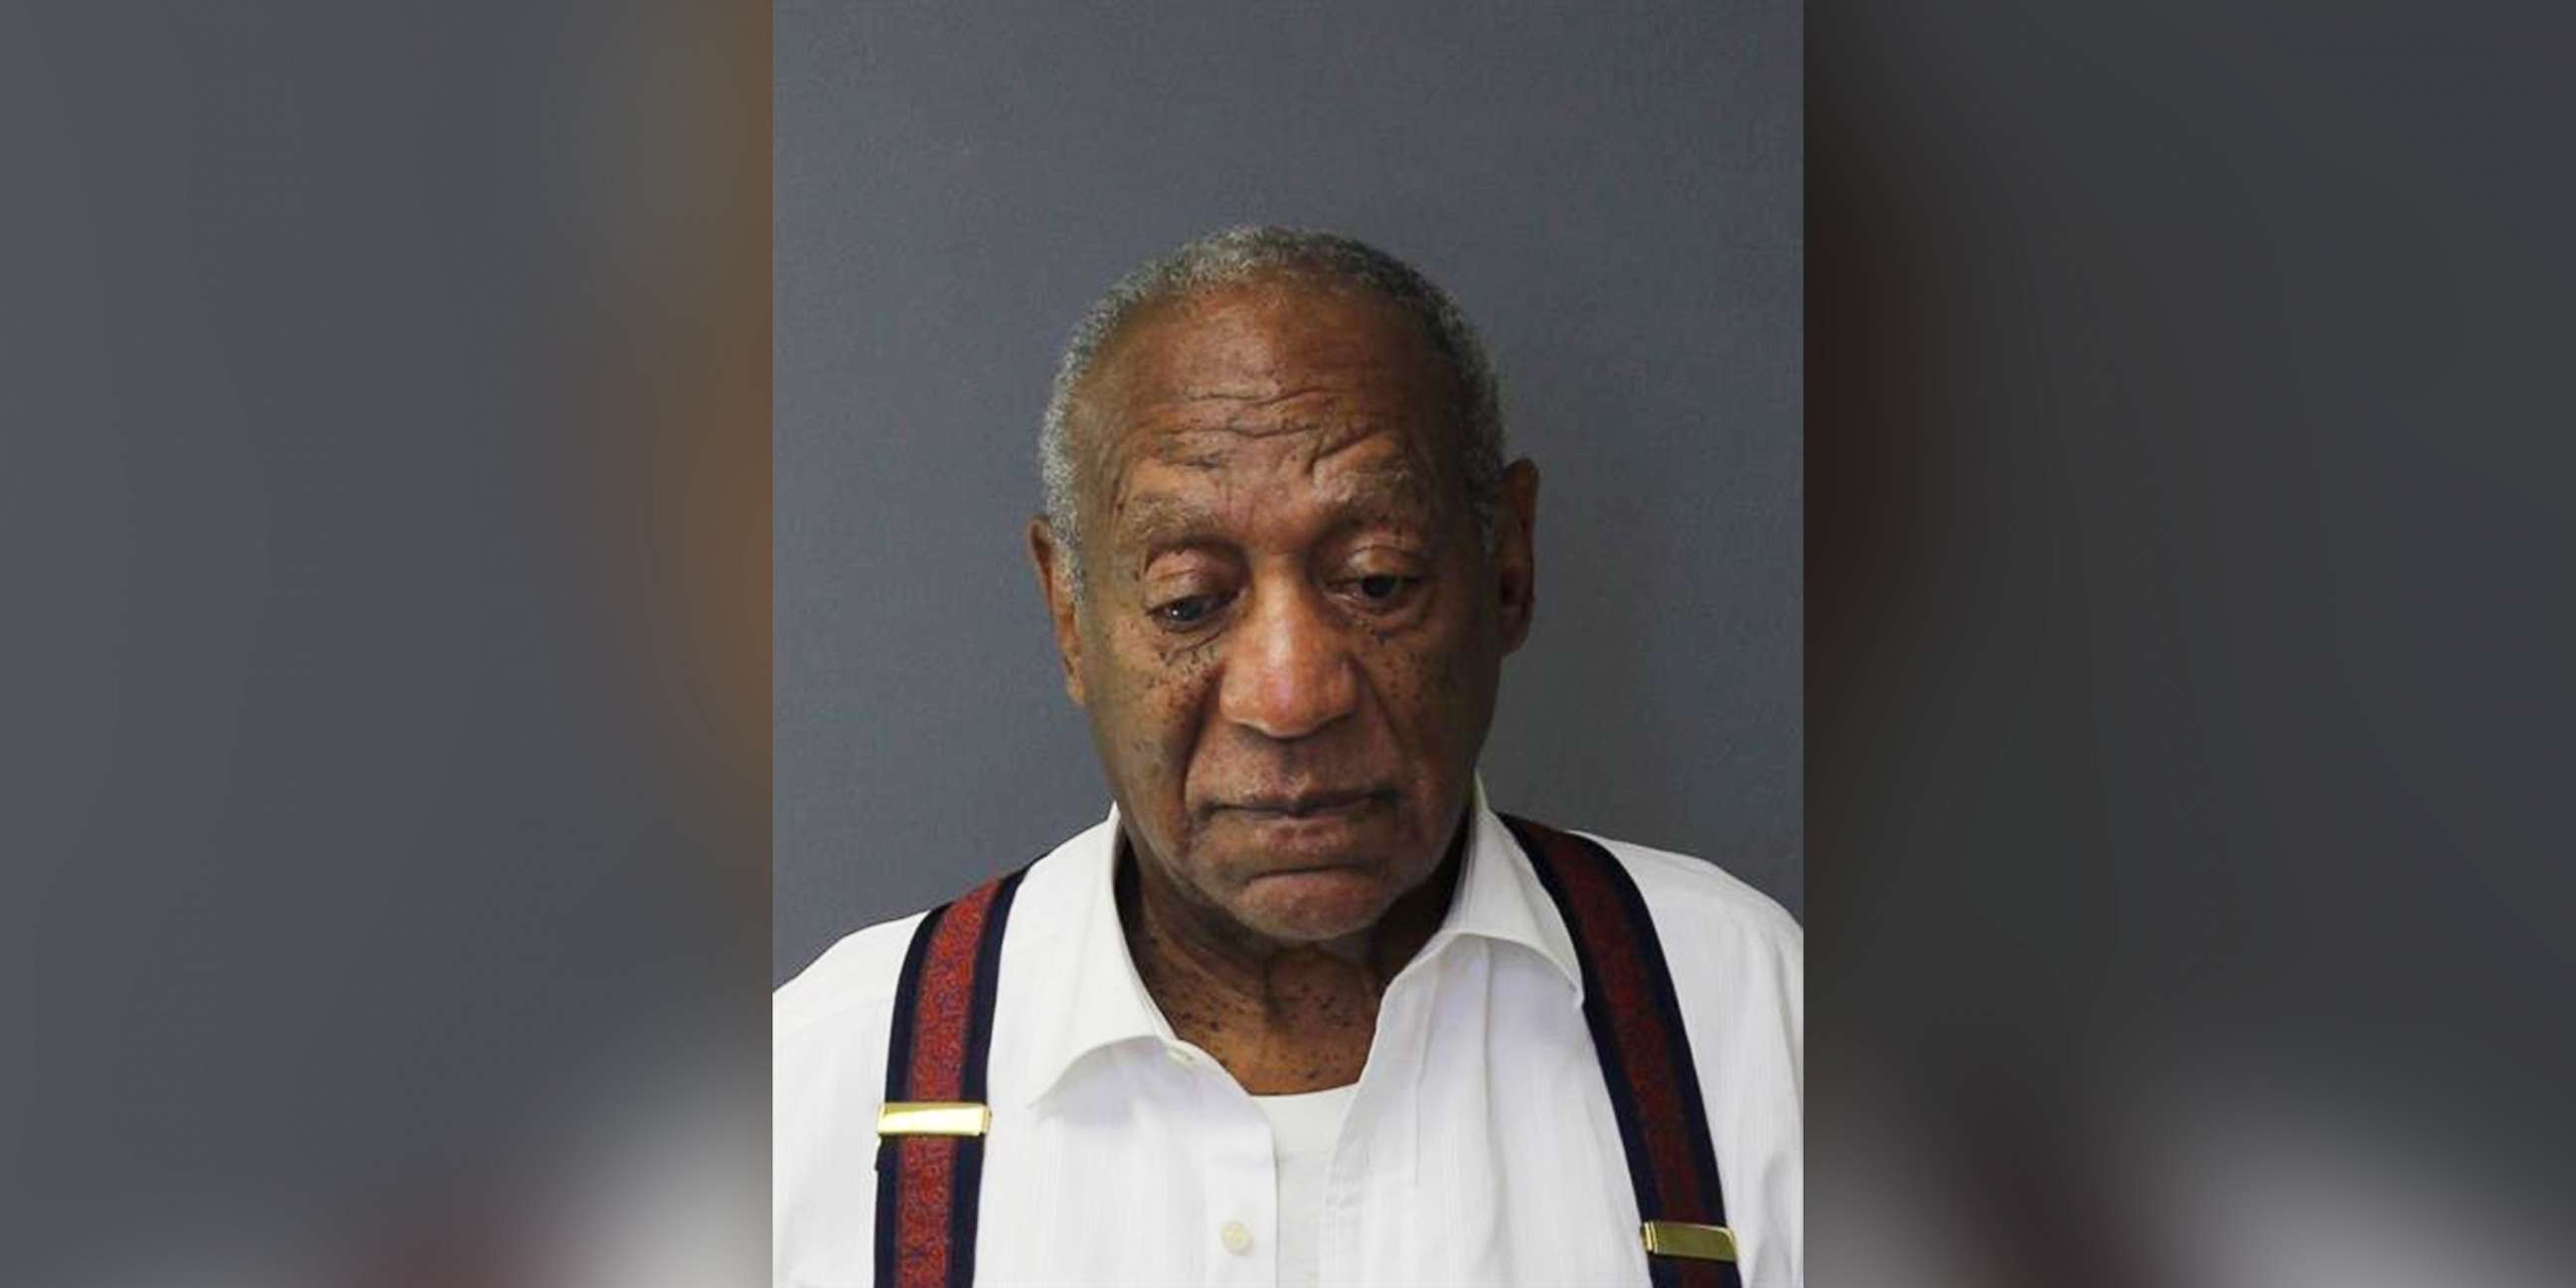 PHOTO: Bill Cosby is pictured in a booking photo released by the Montgomery County Correctional Facility on Sept. 25, 2018.